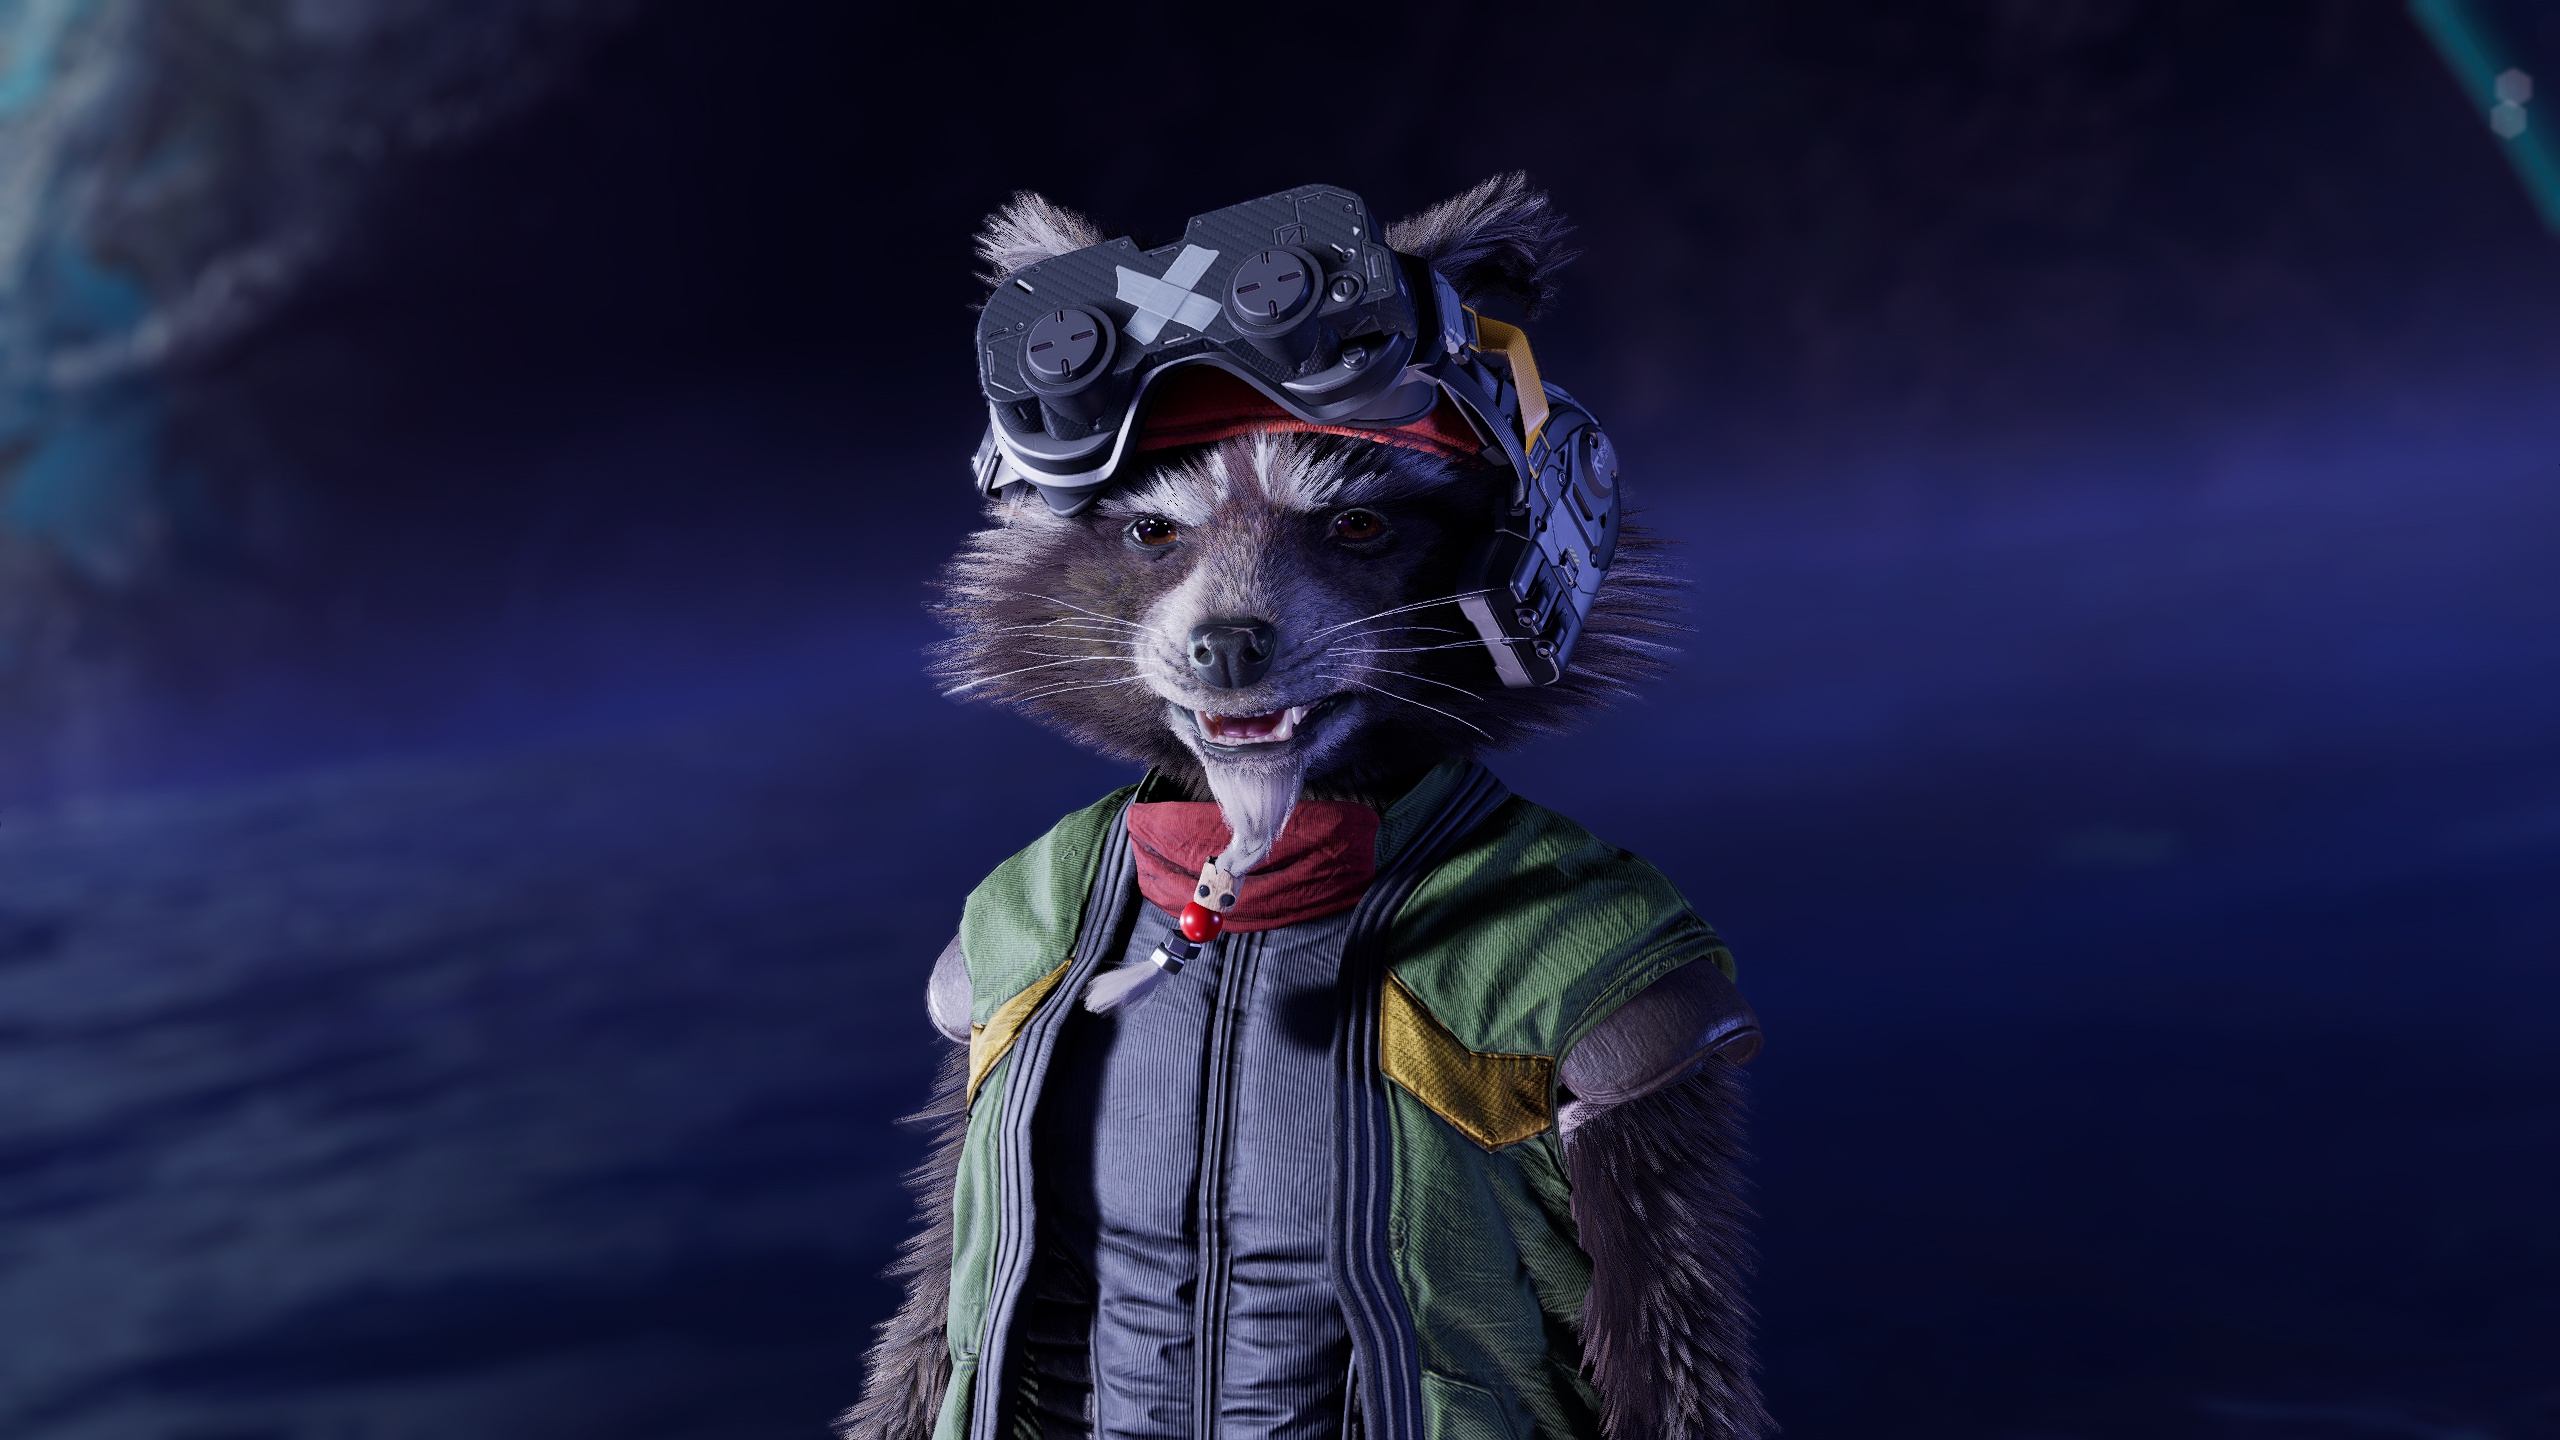 General 2560x1440 Guardians of the Galaxy (Game) Guardians of the Galaxy Rocket Raccoon digital art video game characters CGI video game art screen shot animals looking at viewer video games minimalism simple background fur whiskers goggles jacket